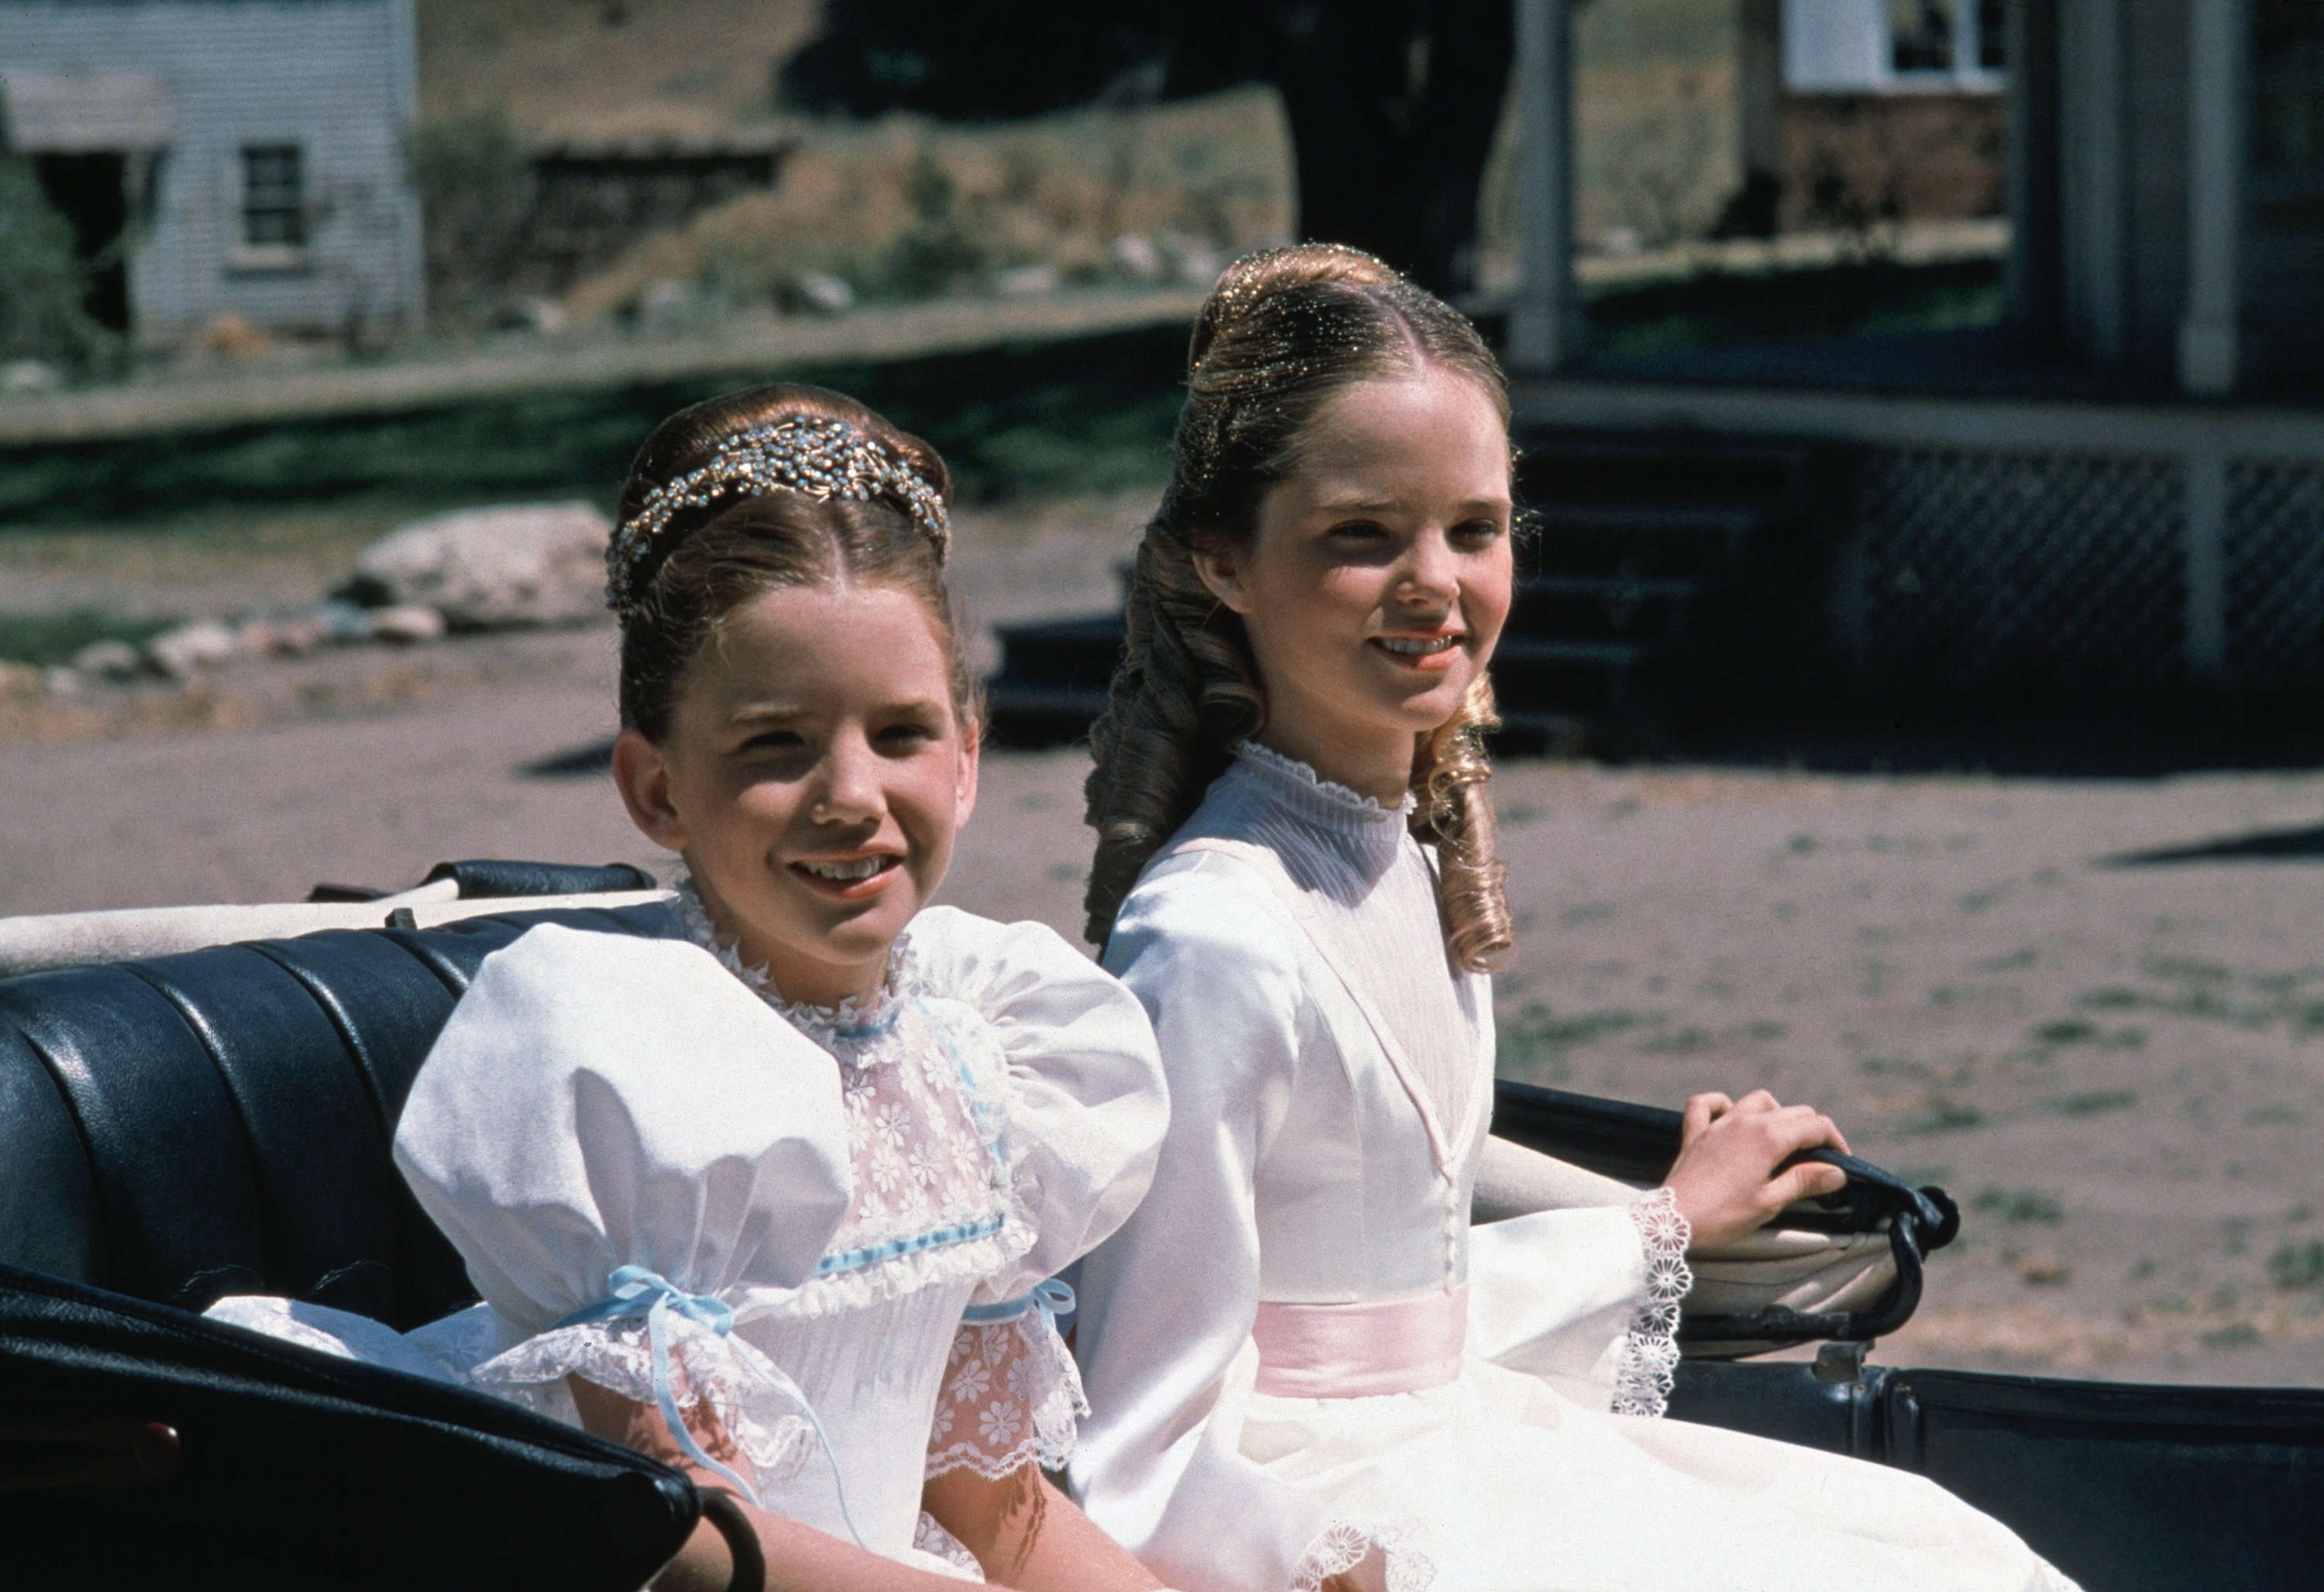 Young Melissa Gilbert and Melissa Sue Anderson in white dresses in a carriage on 'Little House on the Prairie'